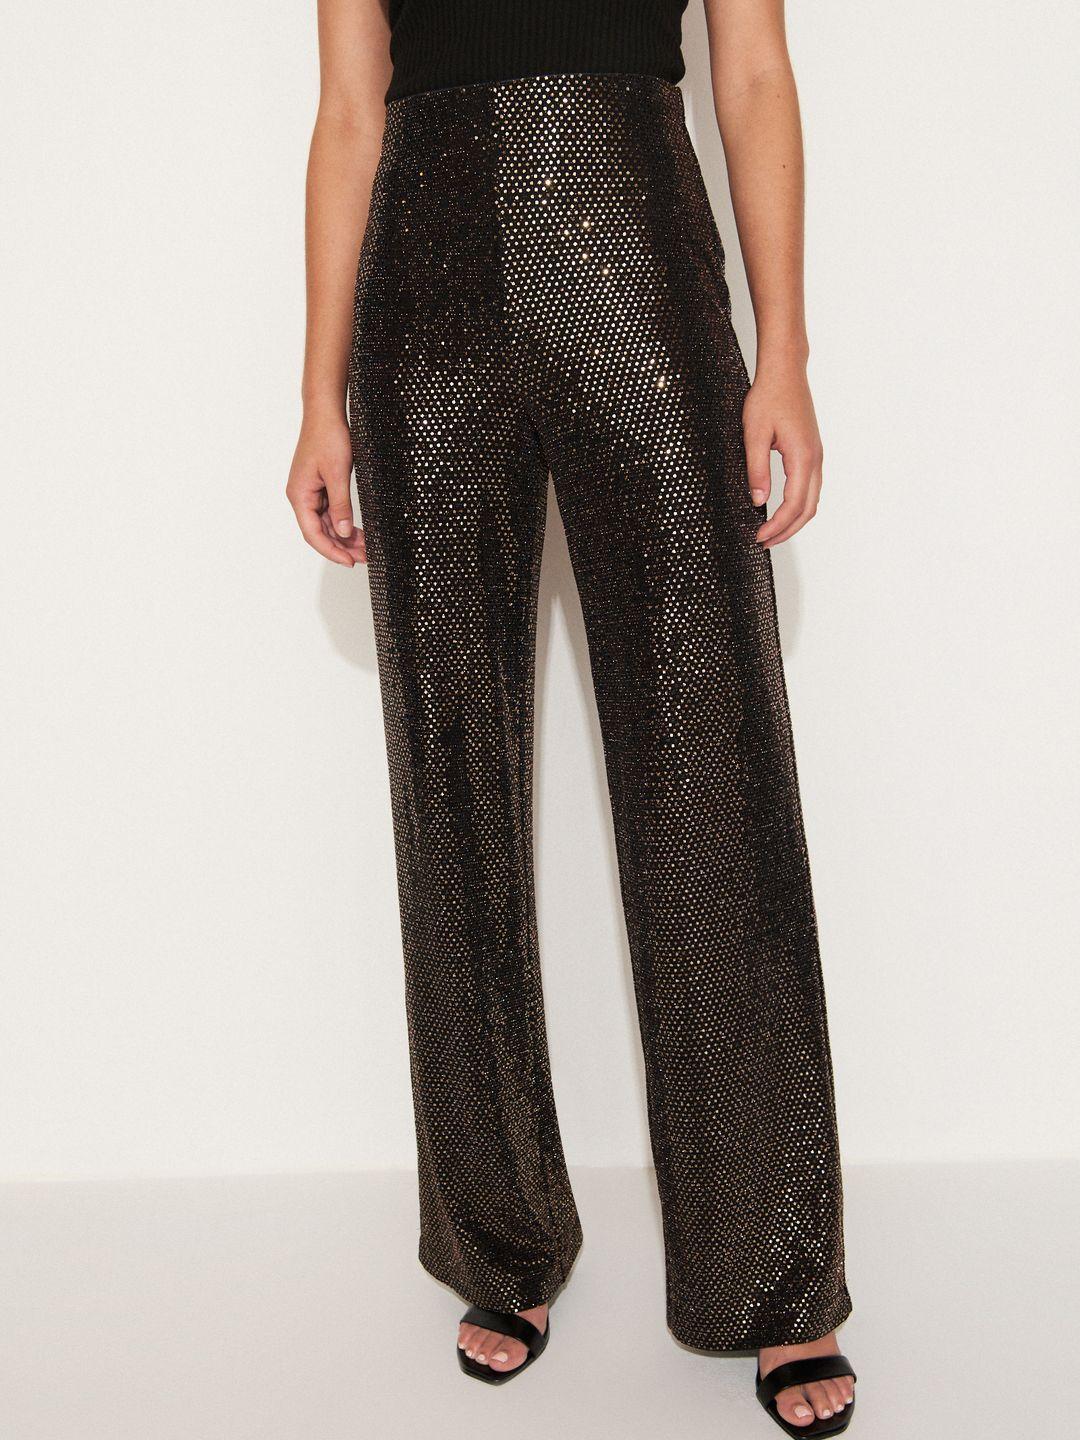 next-women-embellished-trousers